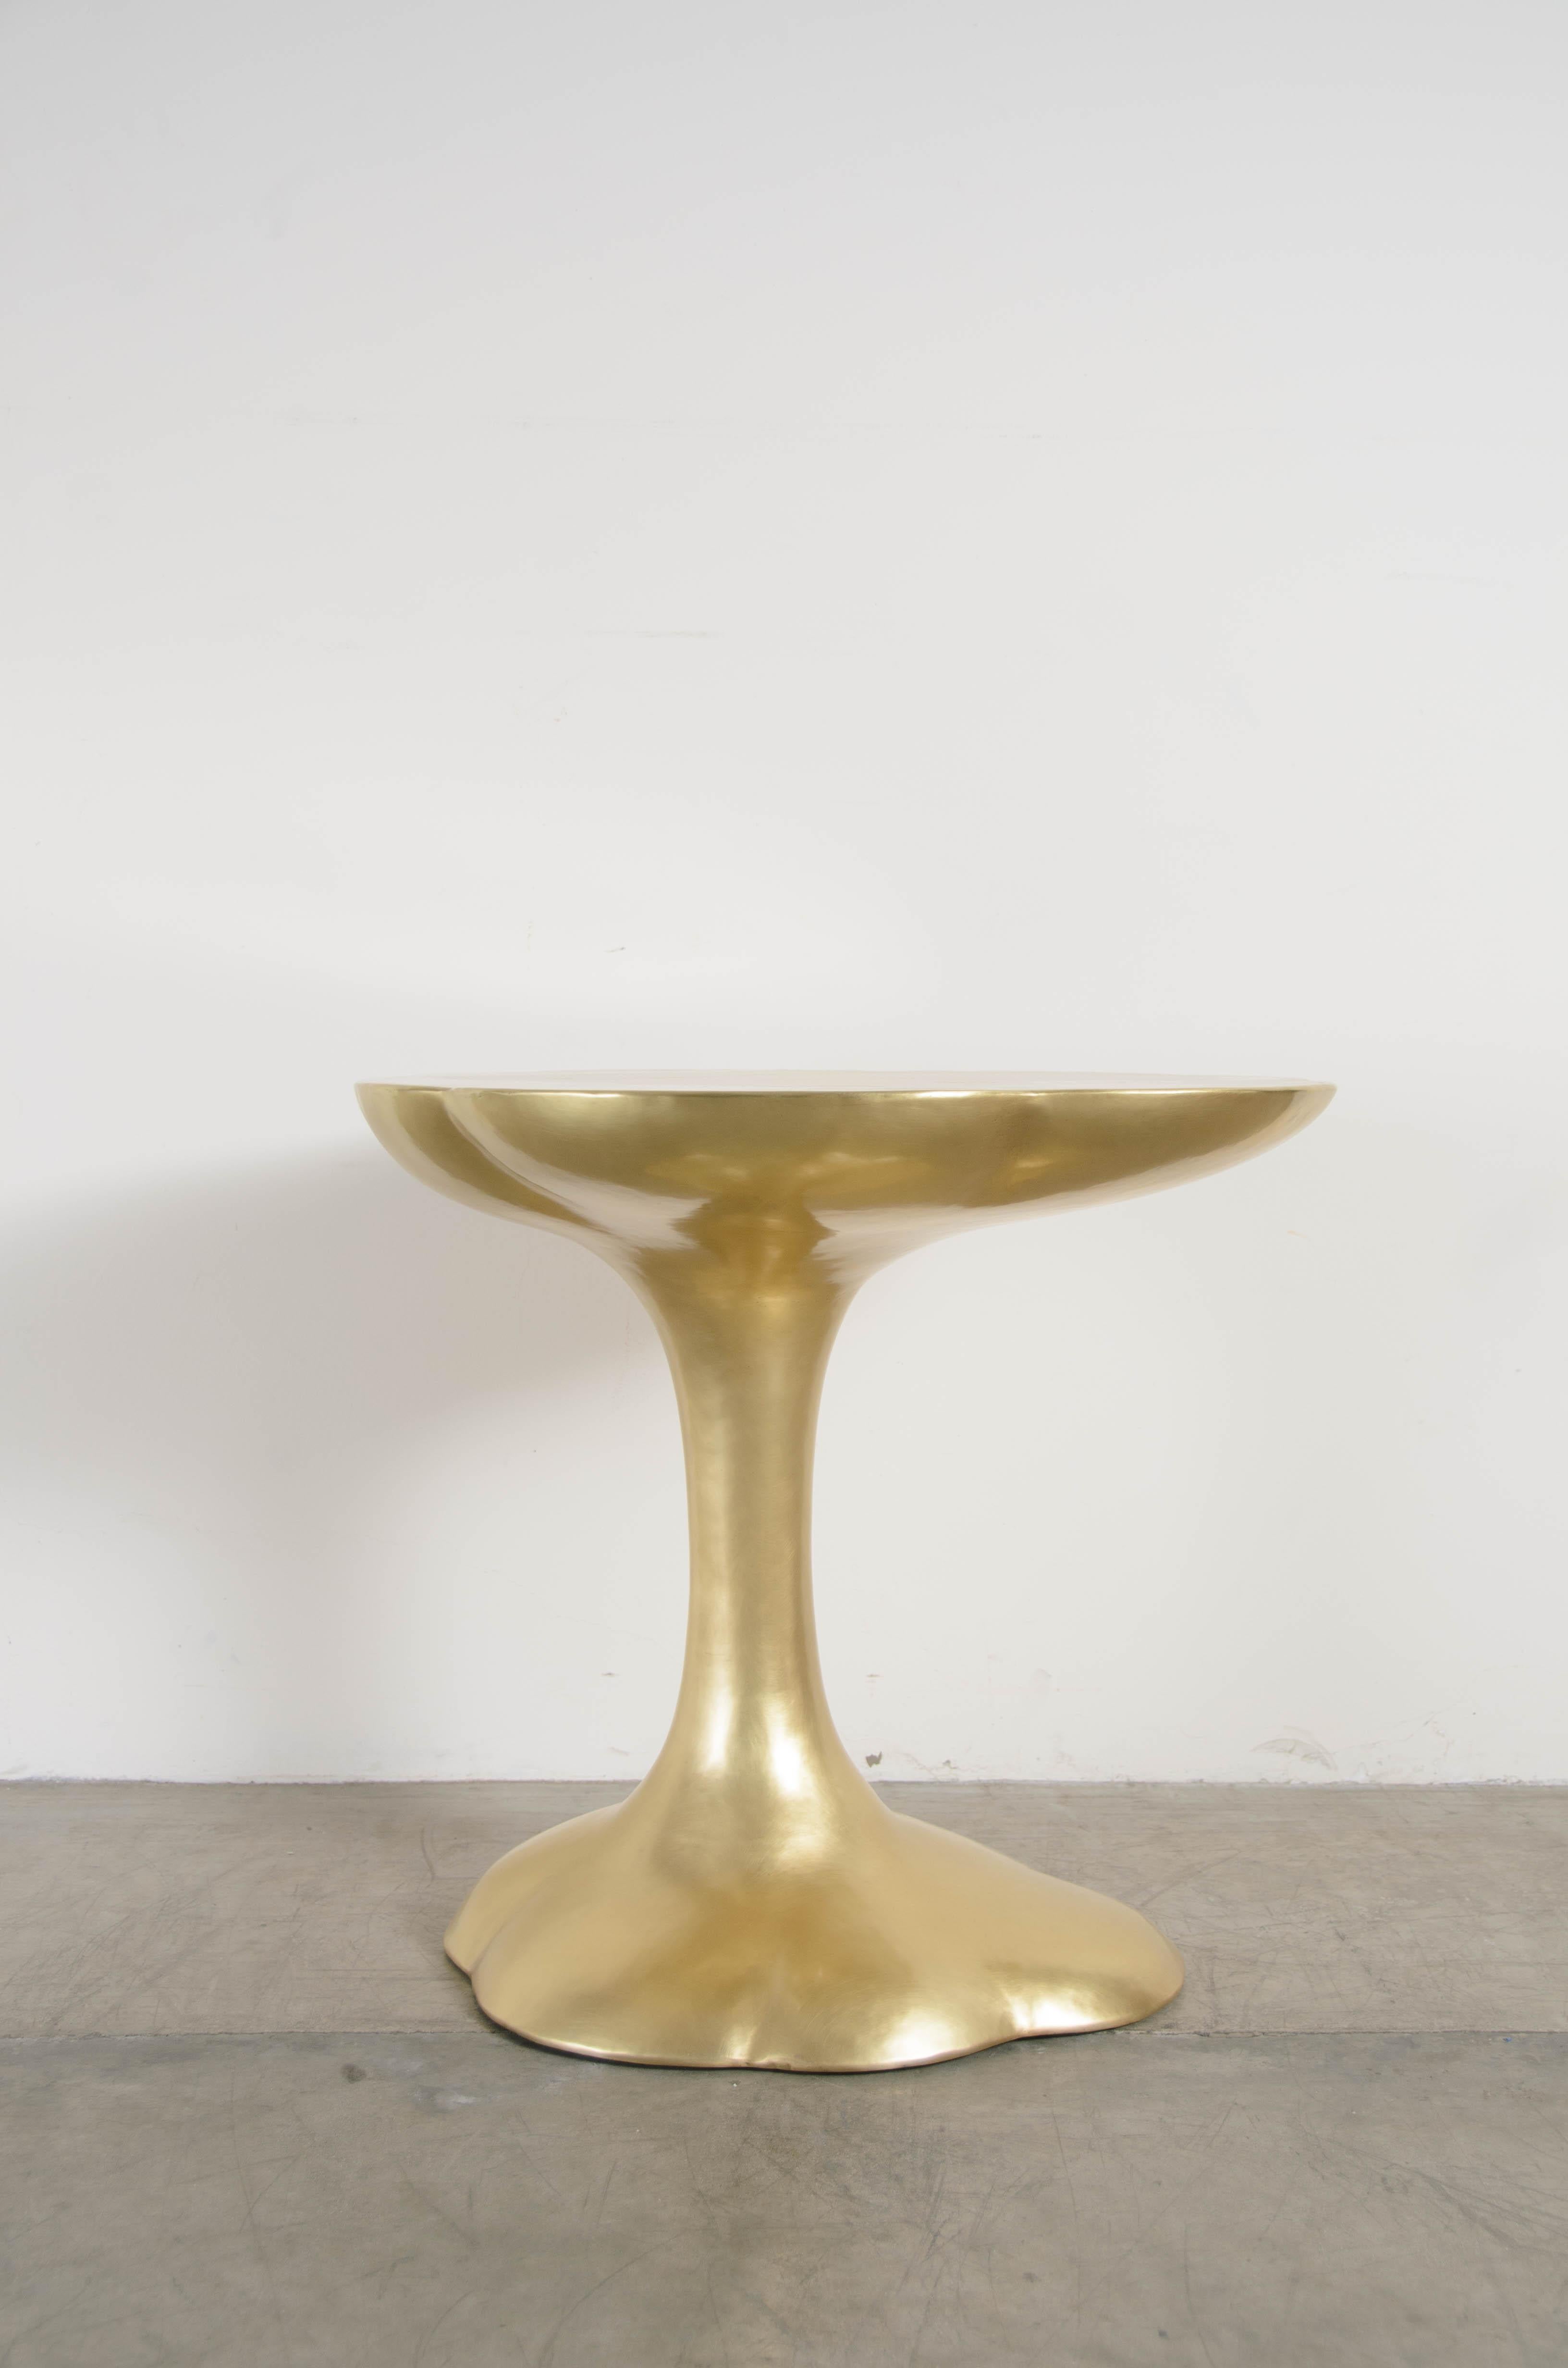 Nuage side table 
Brass
Hand repoussé
Limited edition
Each piece is individually crafted and is unique. 
Repoussé is the traditional art of hand-hammering decorative relief onto sheet metal. The technique originated around 800 BC between Asia